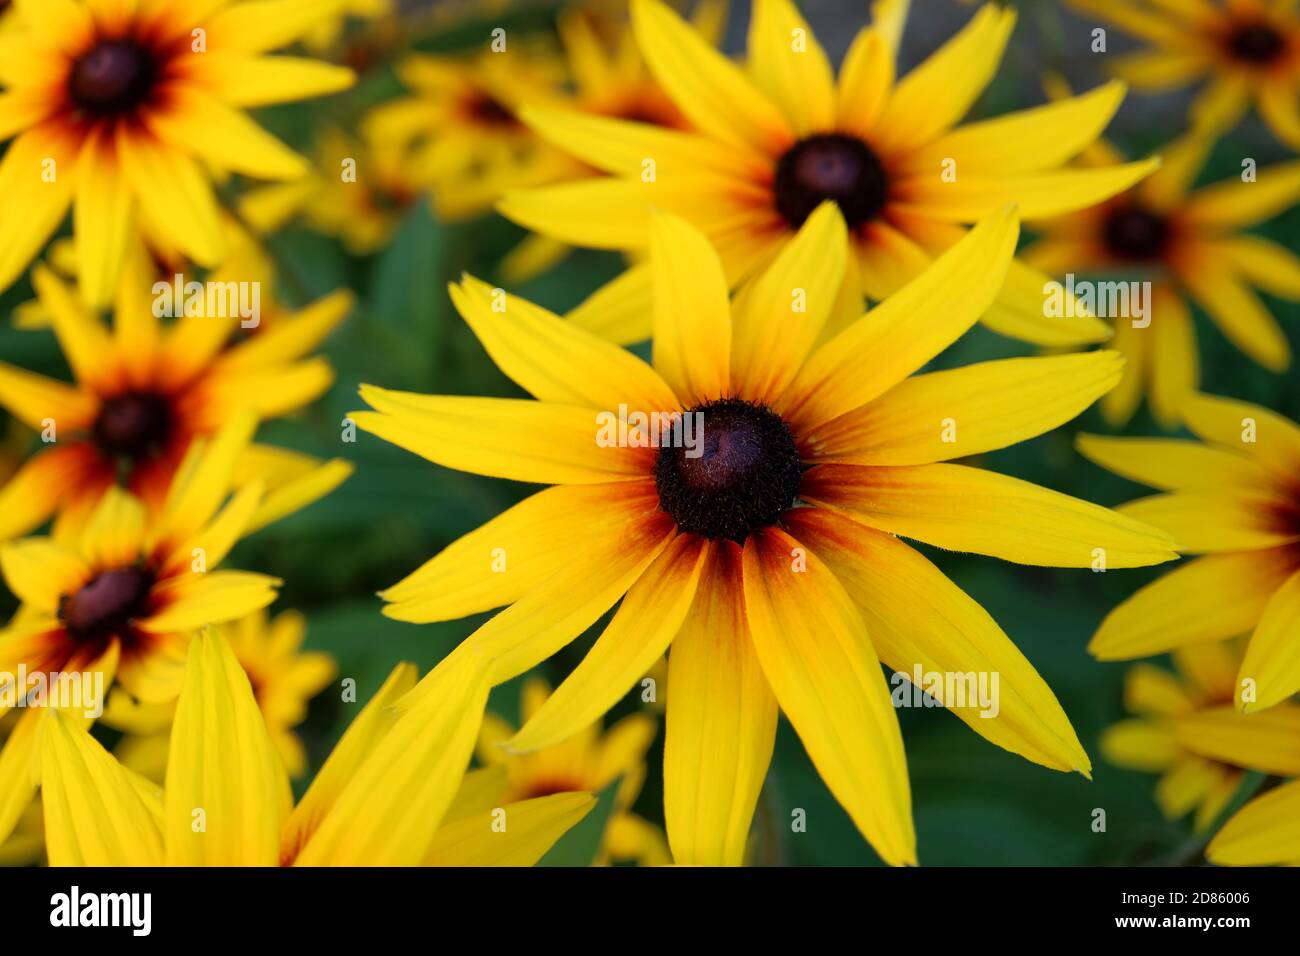 Coneflower rudbeckia, coneflower rudbeckia bicolor is a plant genius in the sunflower family, coneflower with yellow and red color petals, coneflower Stock Photo